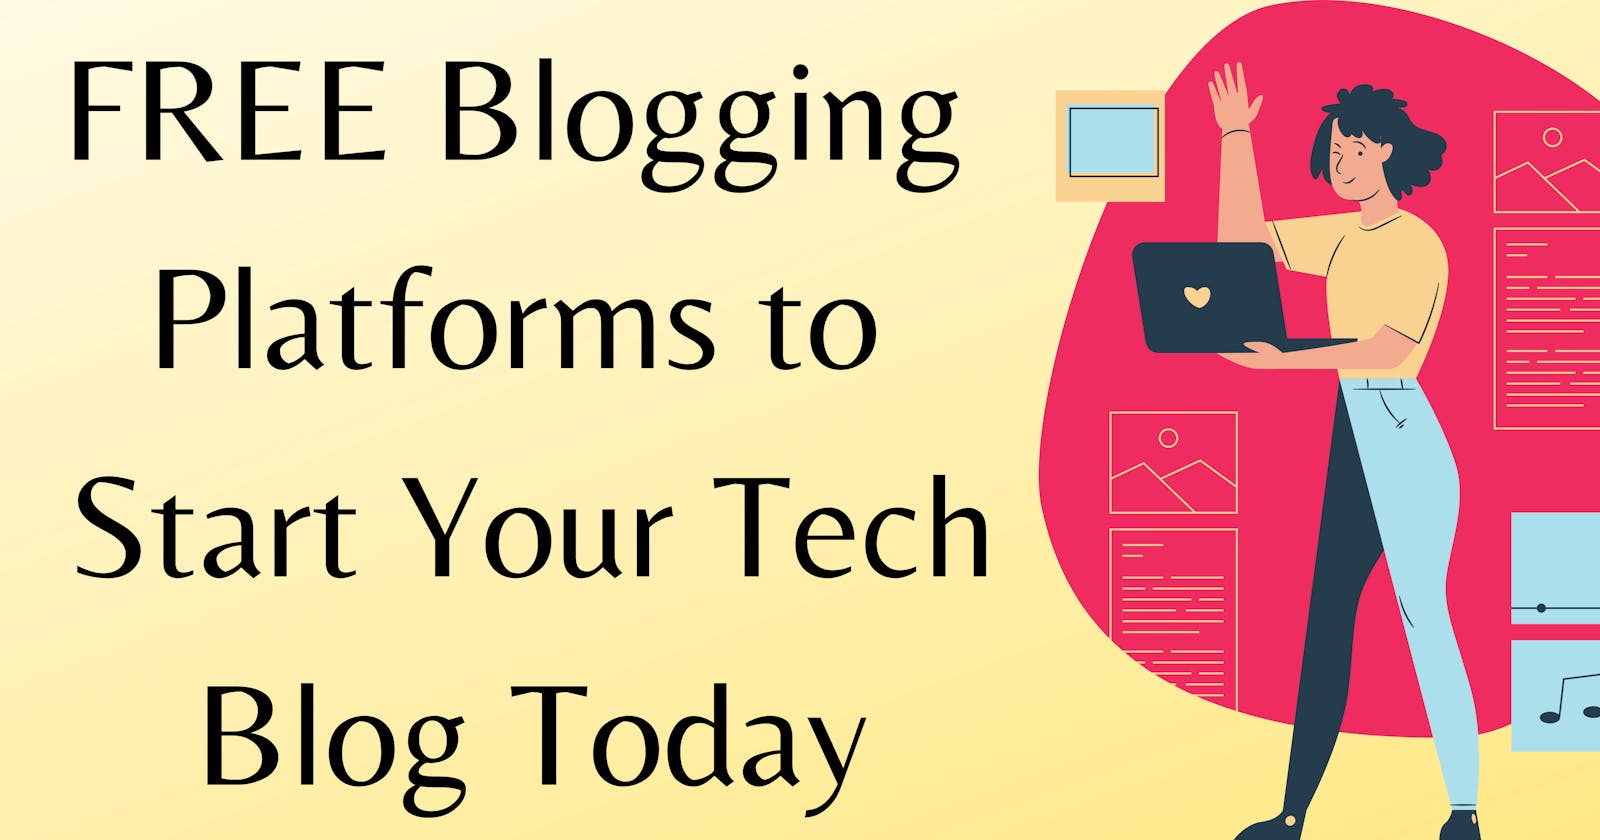 FREE Blogging Platforms to Start Your Tech Blog Today